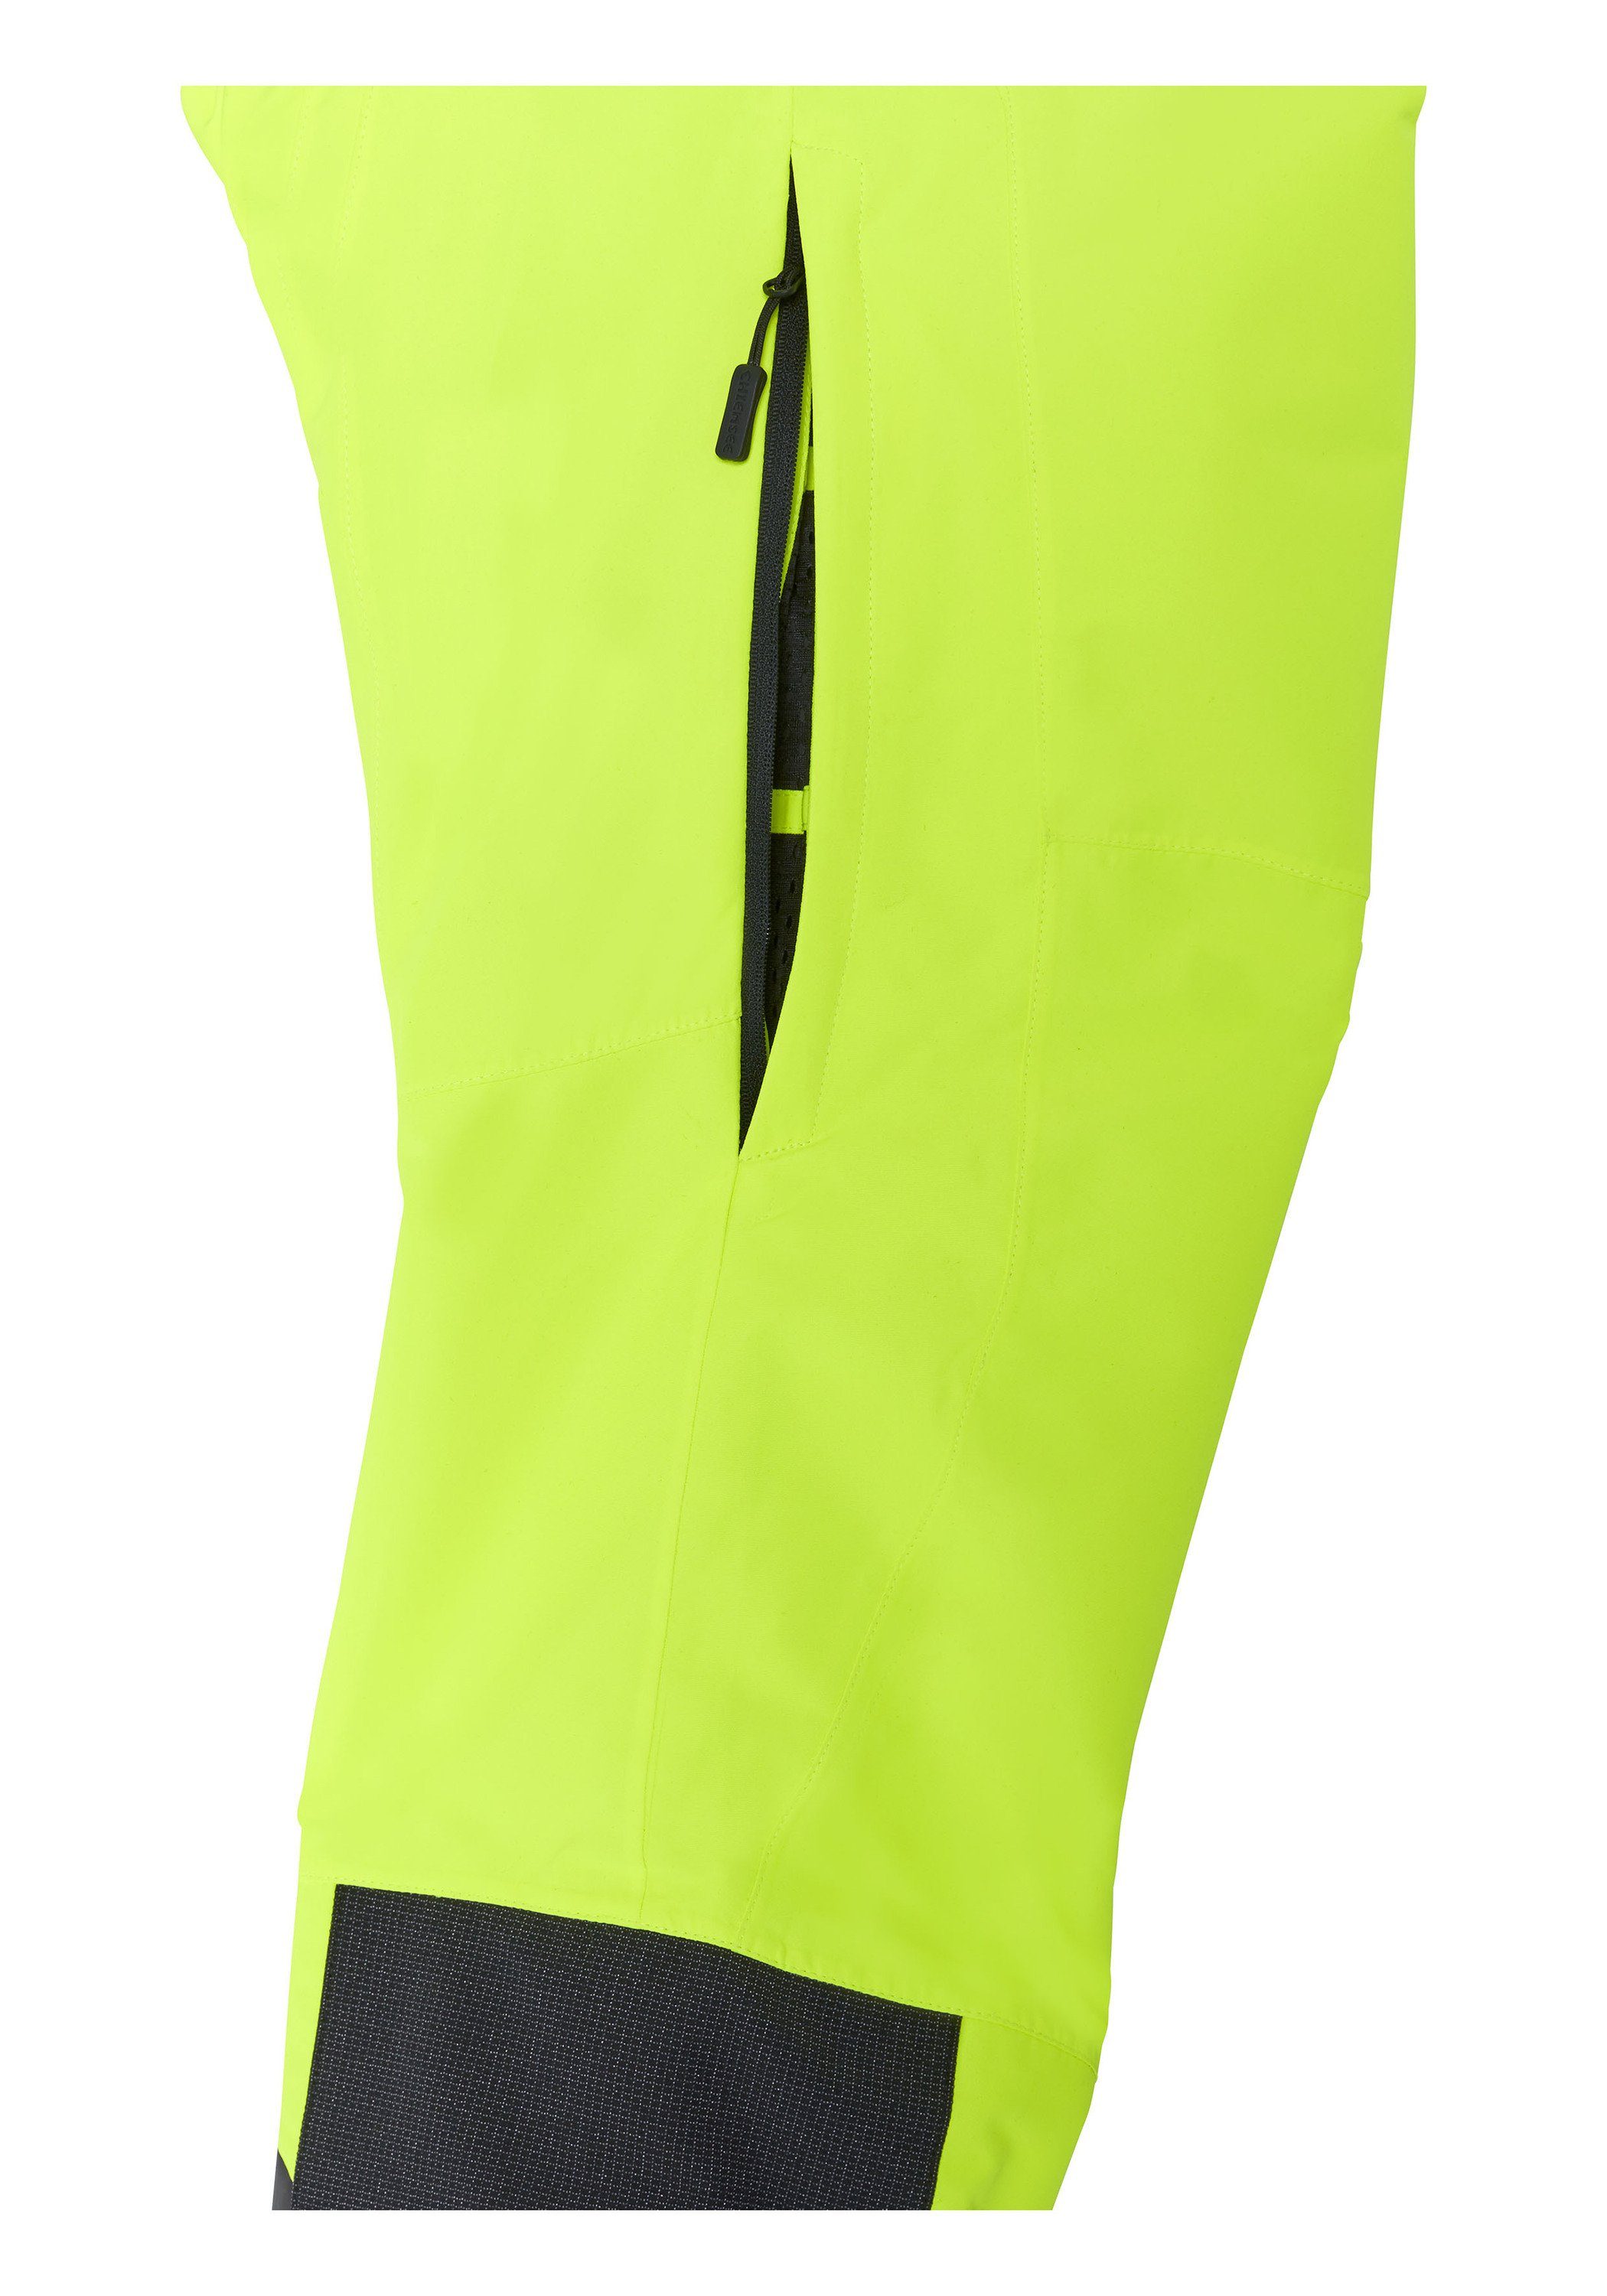 (1-tlg) Chiemsee Safety Sporthose Yellow mit Schneefang